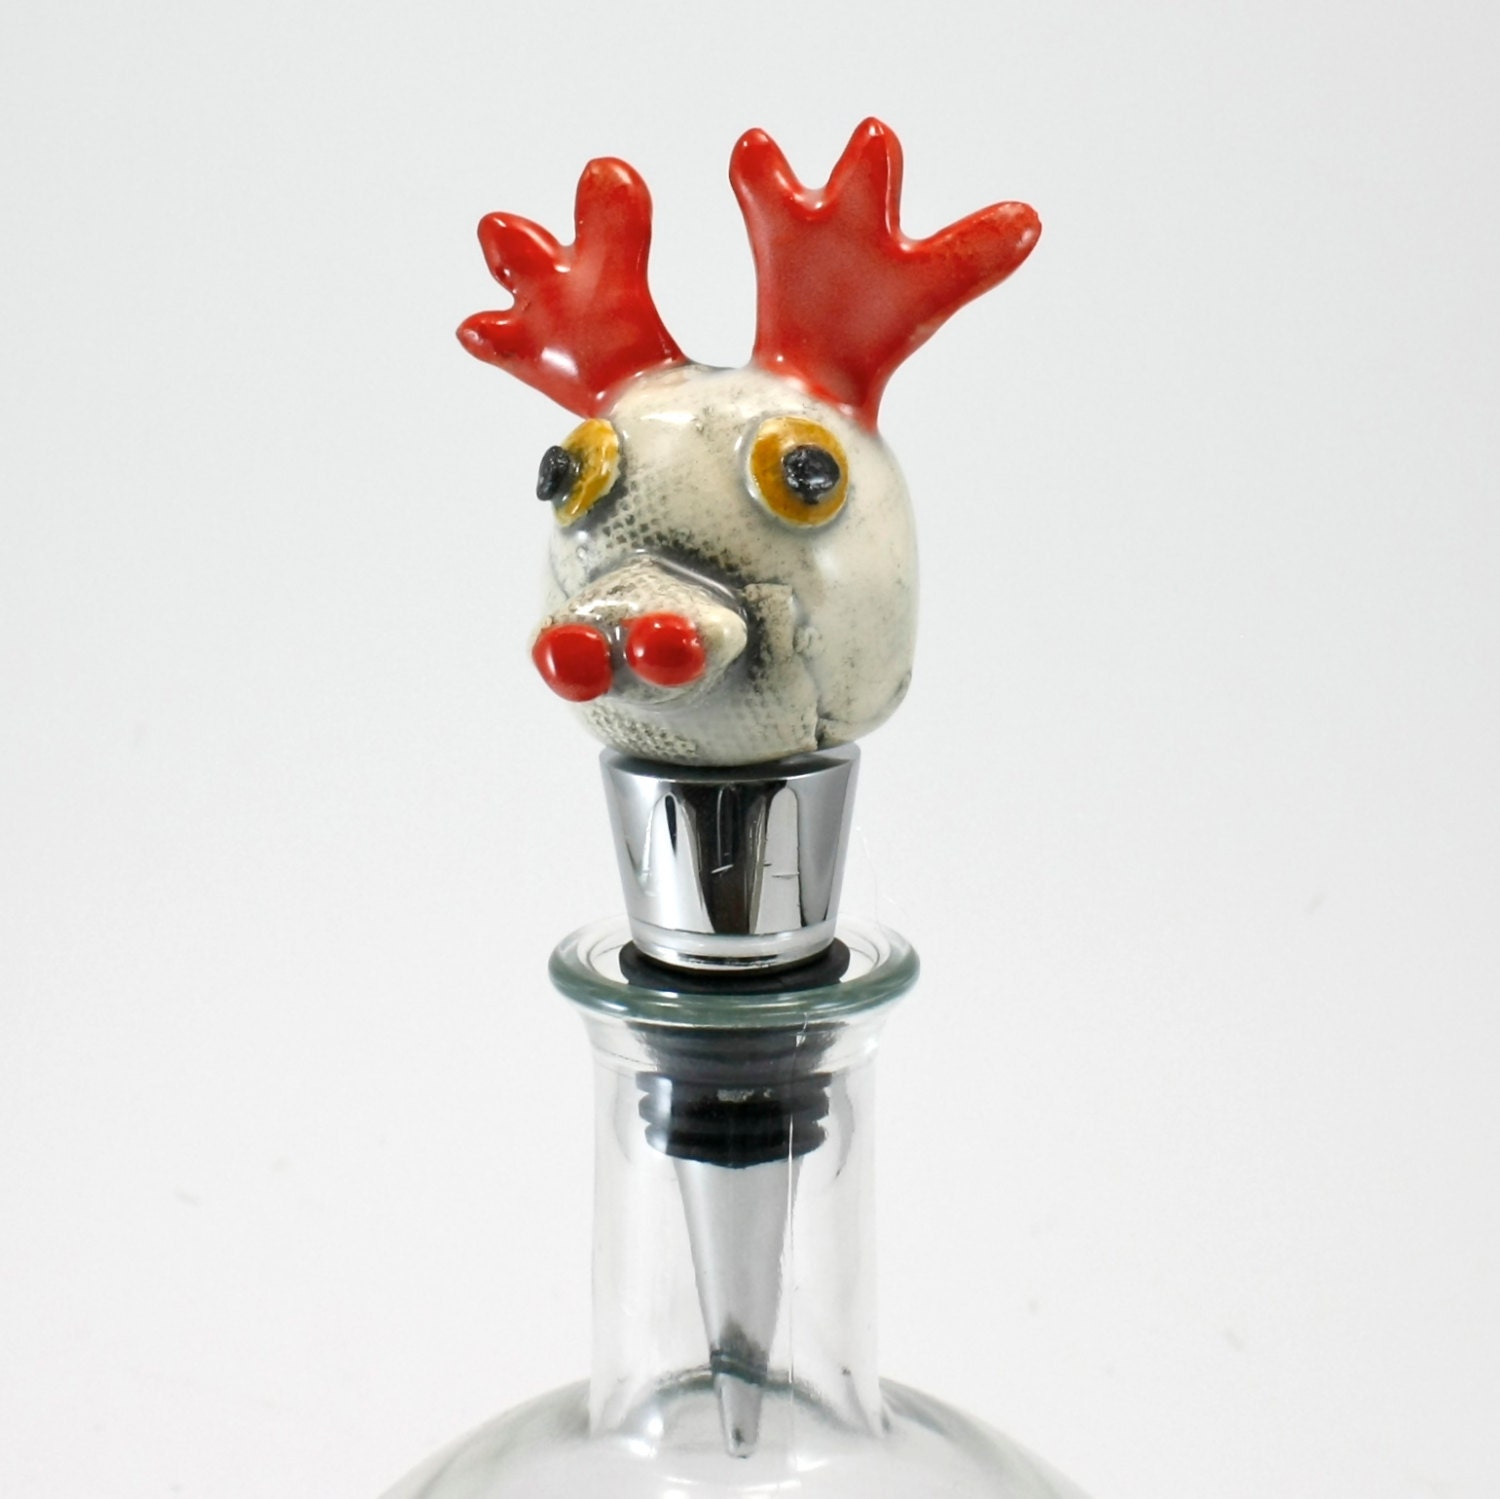 Moose Bottle Stopper with Stainless Steel Stopper "Quirky Cork" ceramic porcelain sculpture in bright orange, mustard and white